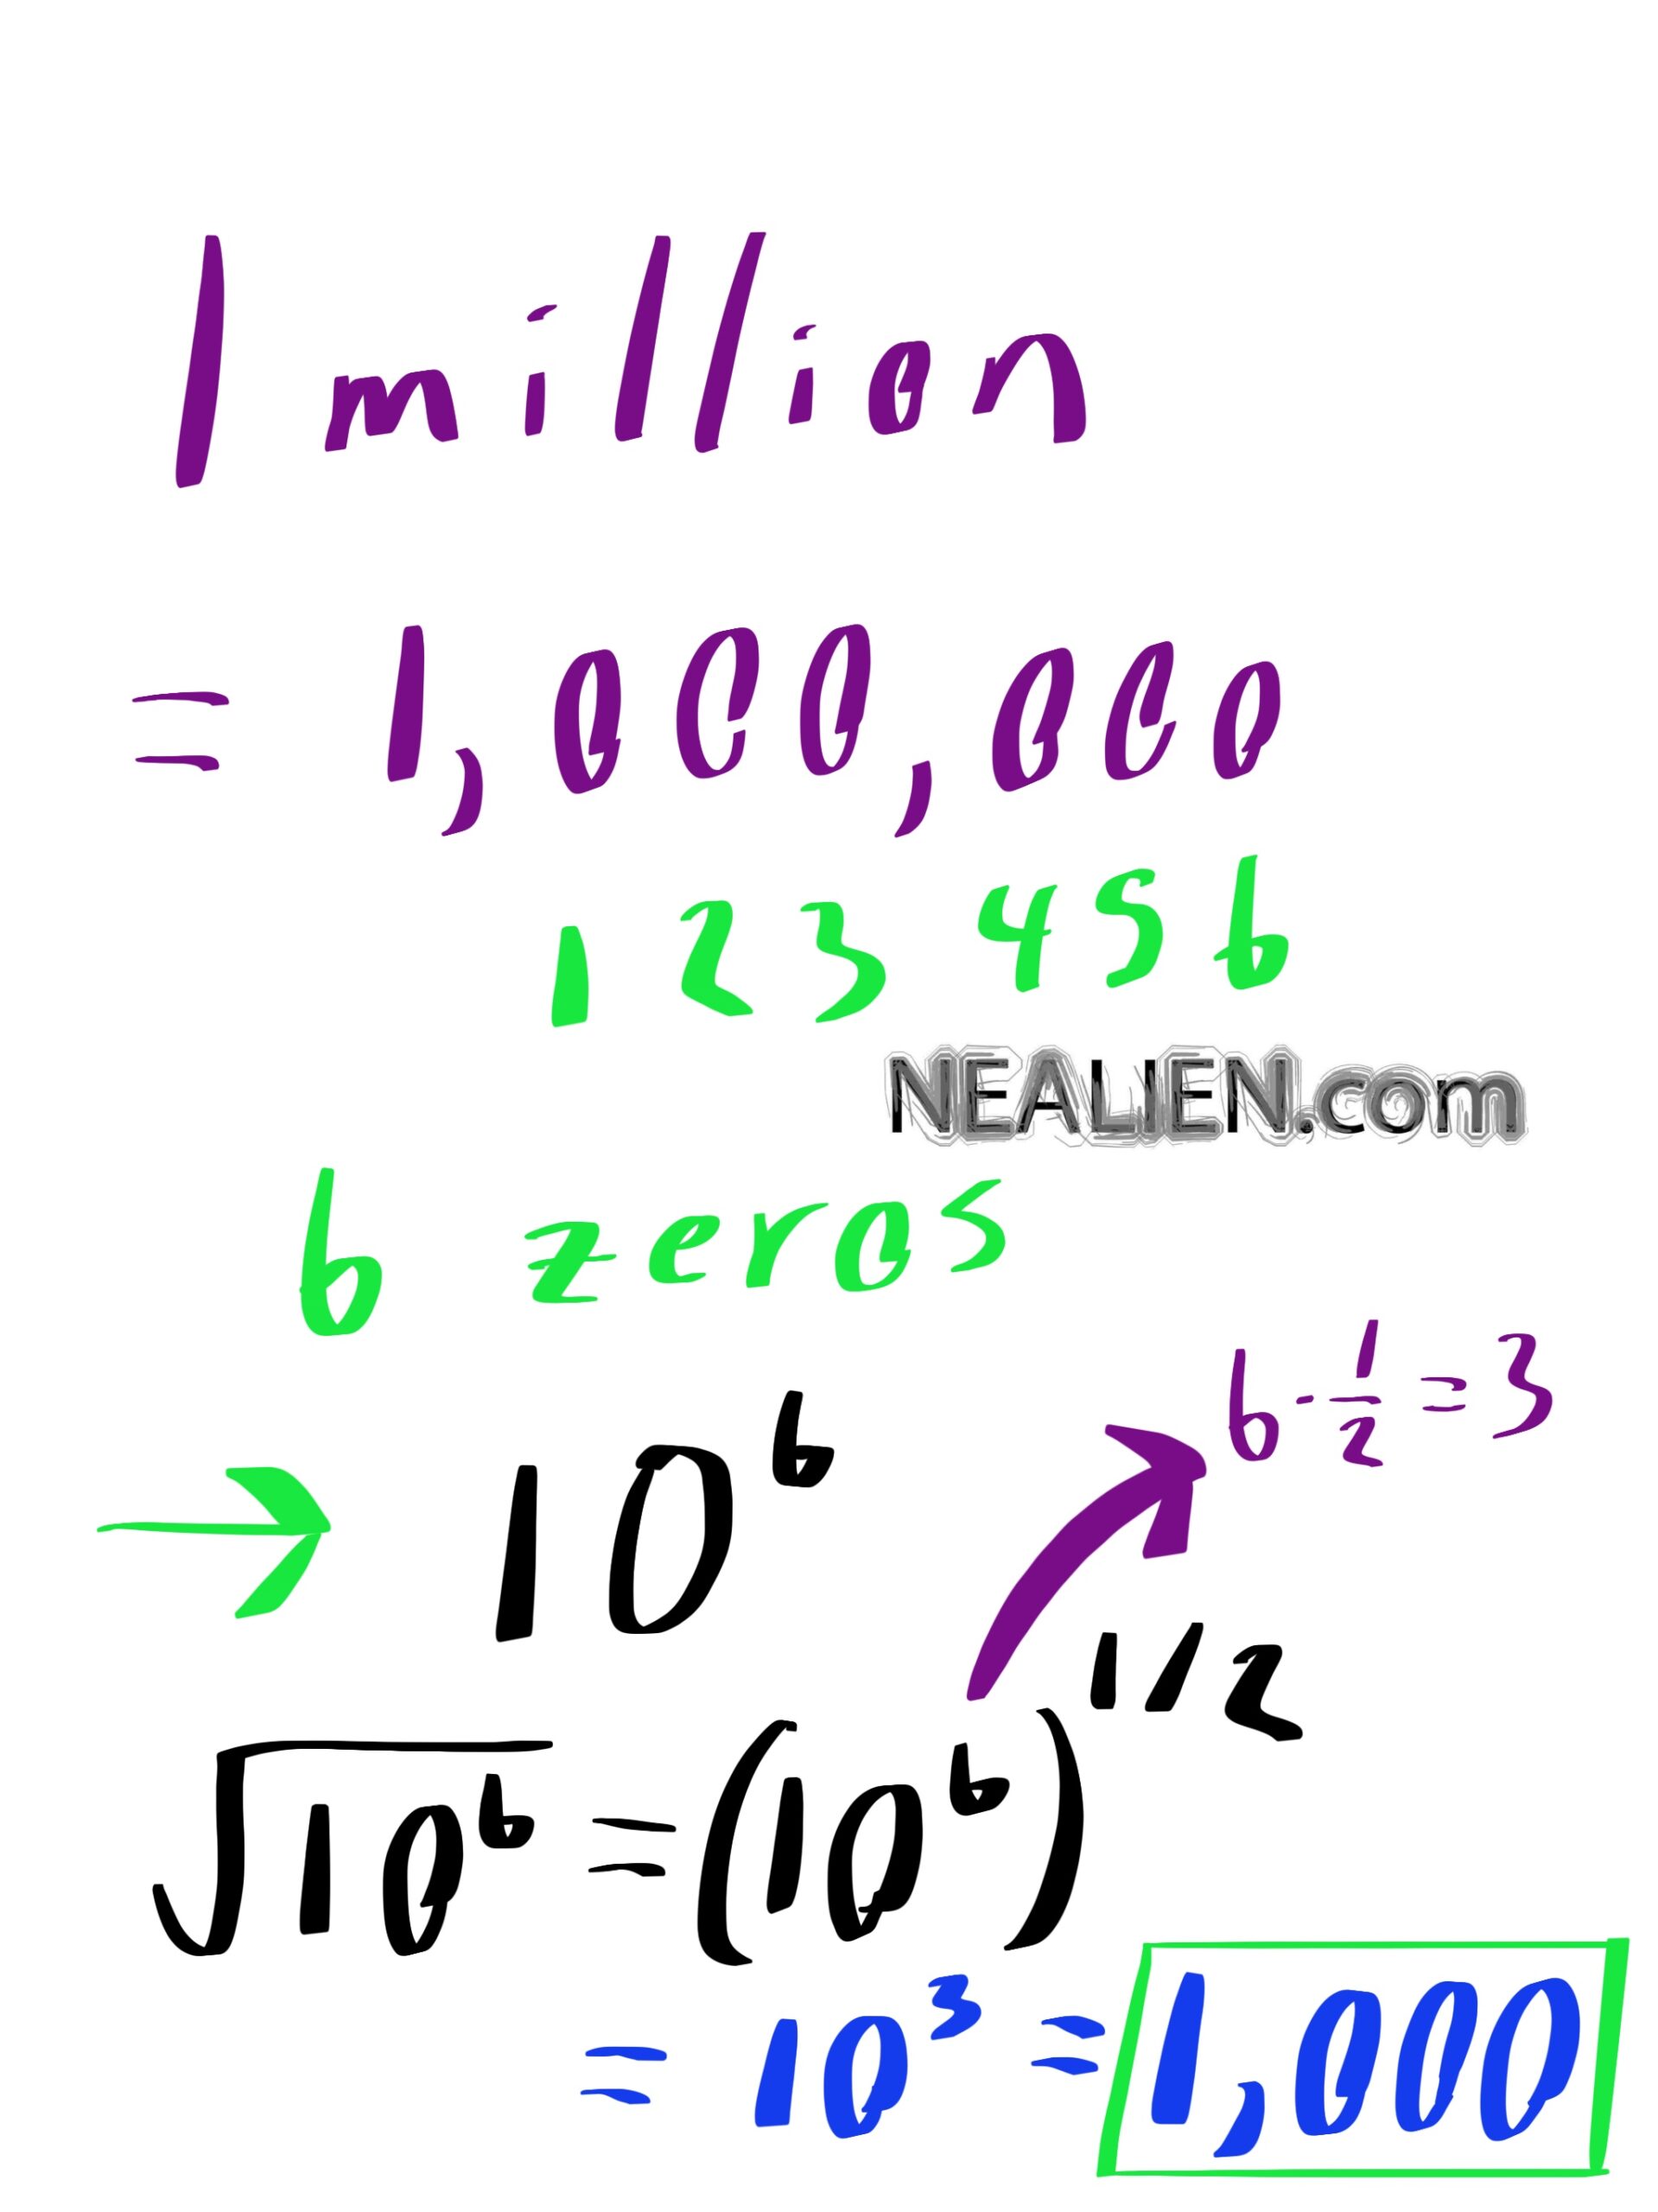 What is the square root of one million?